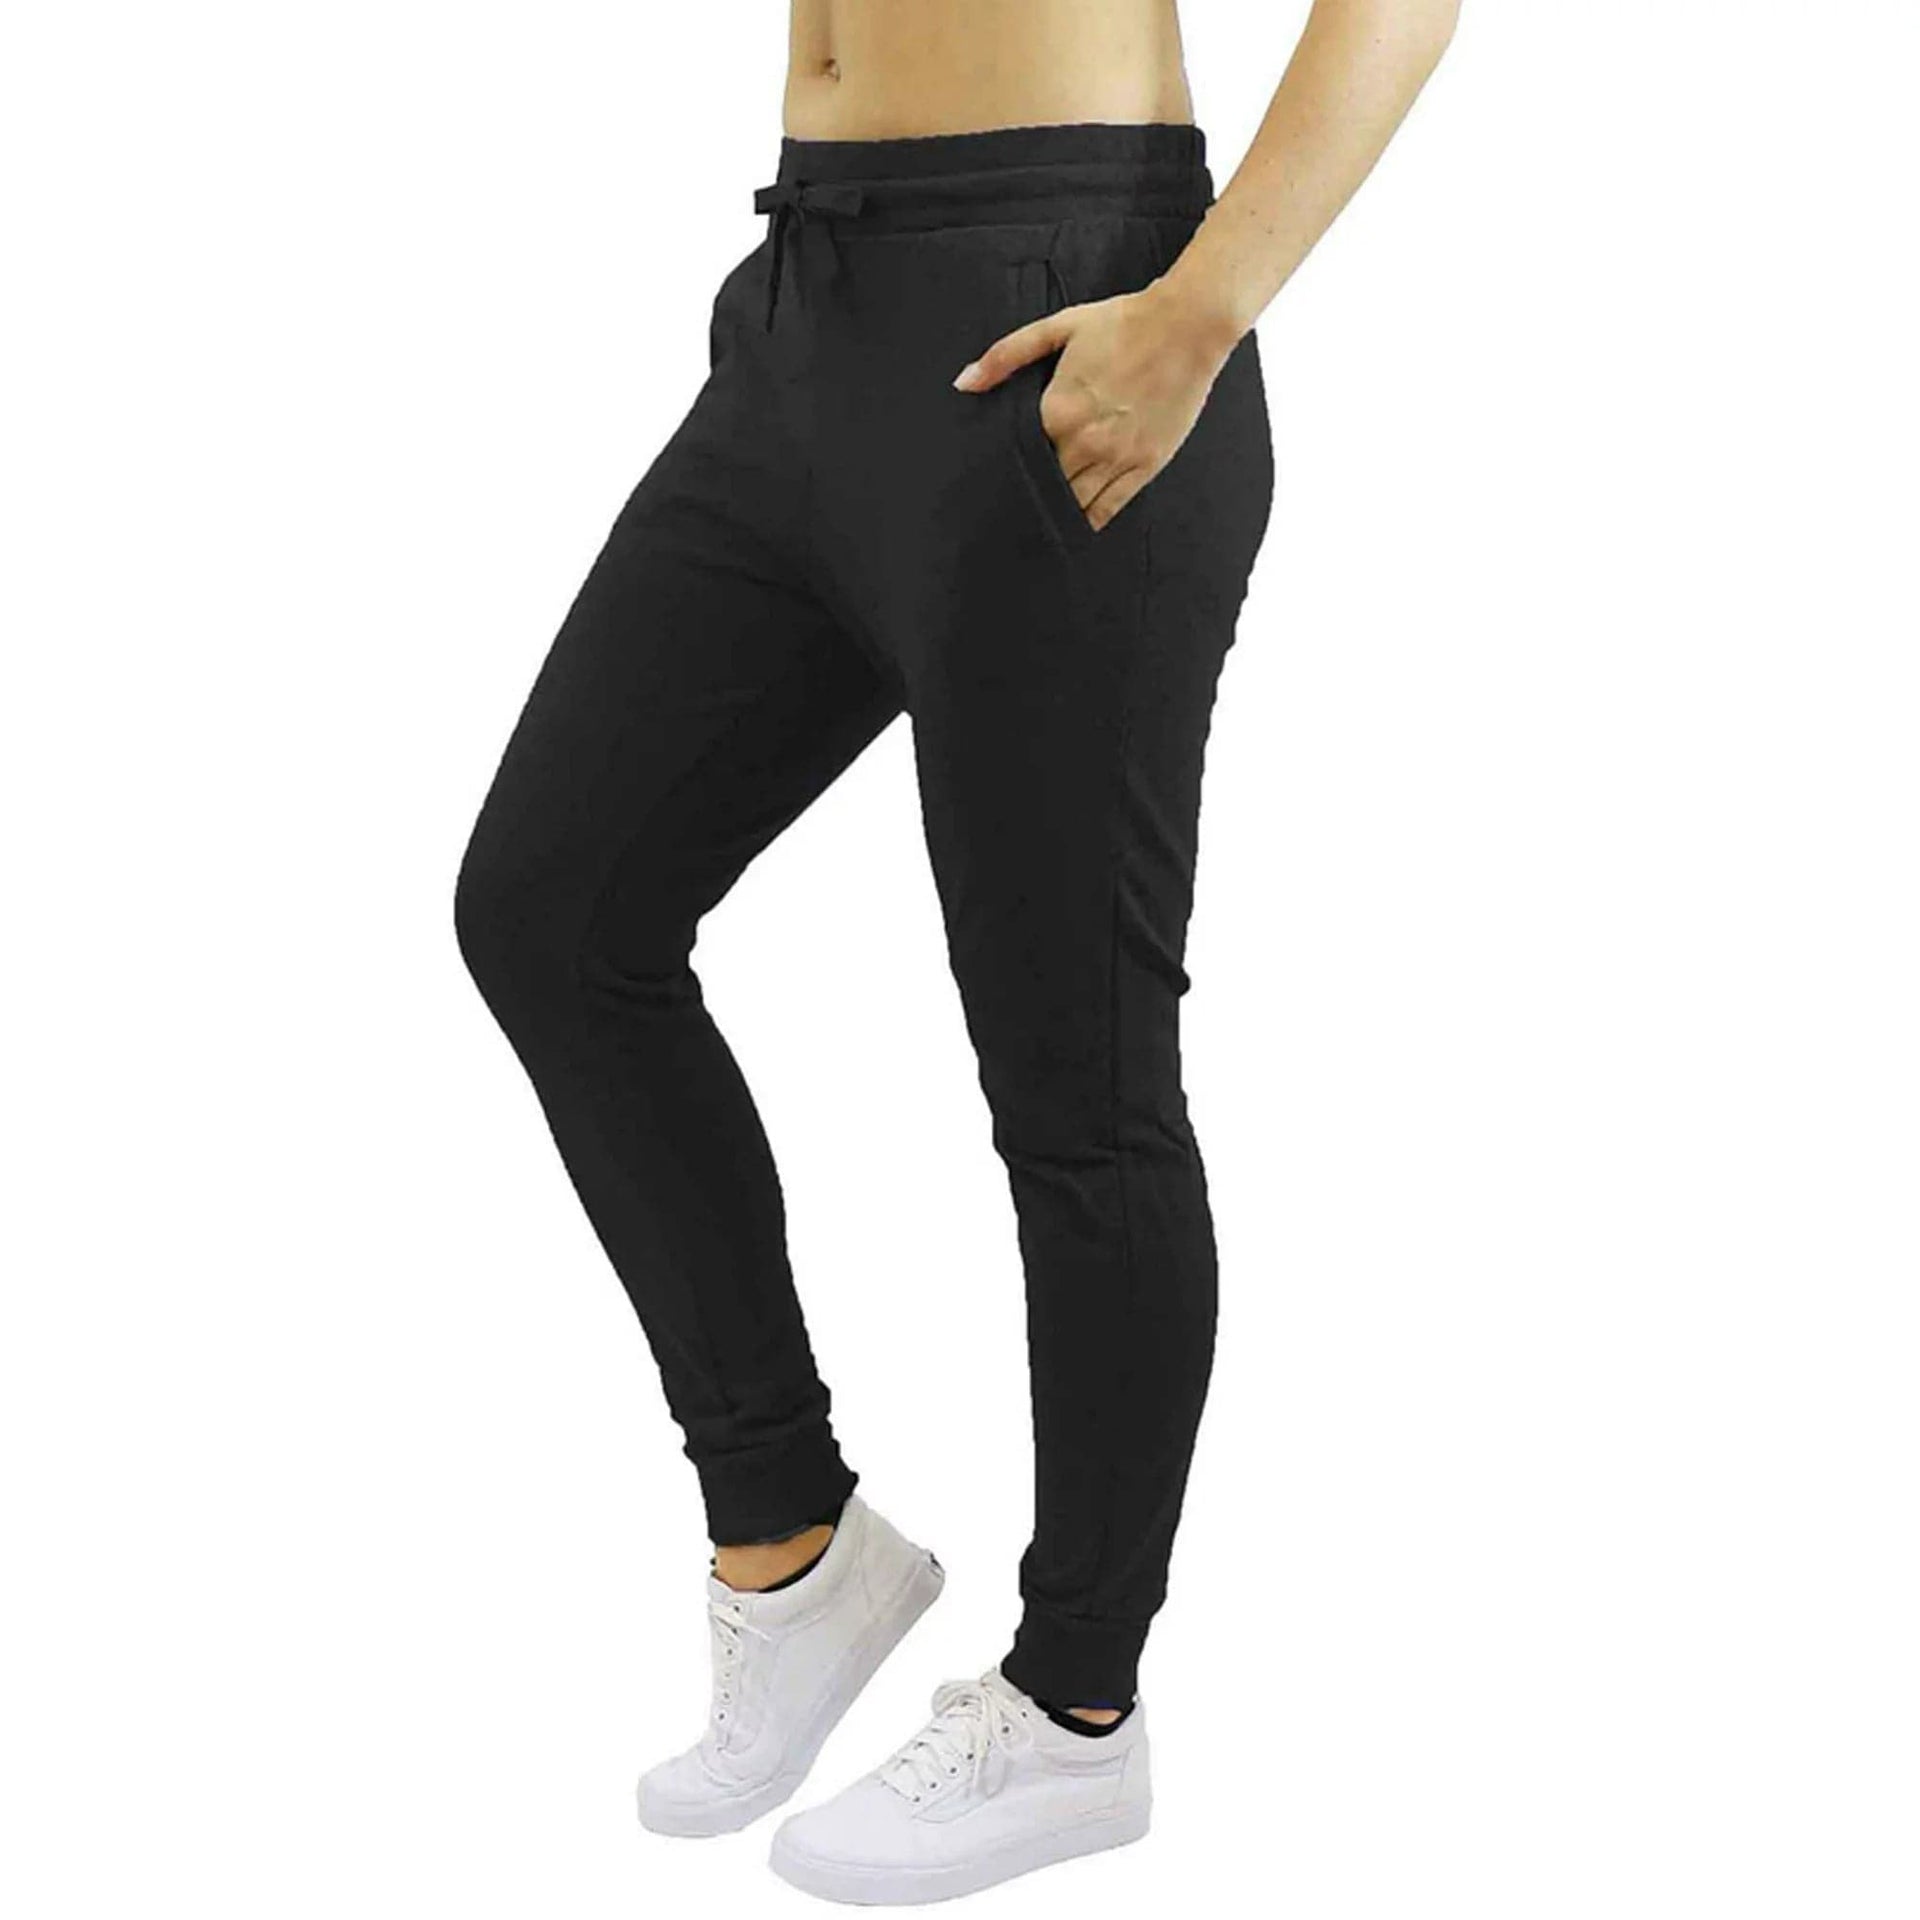 GALAXY By Harvic Women's Black Joggers Sweat Pants NEW Large L